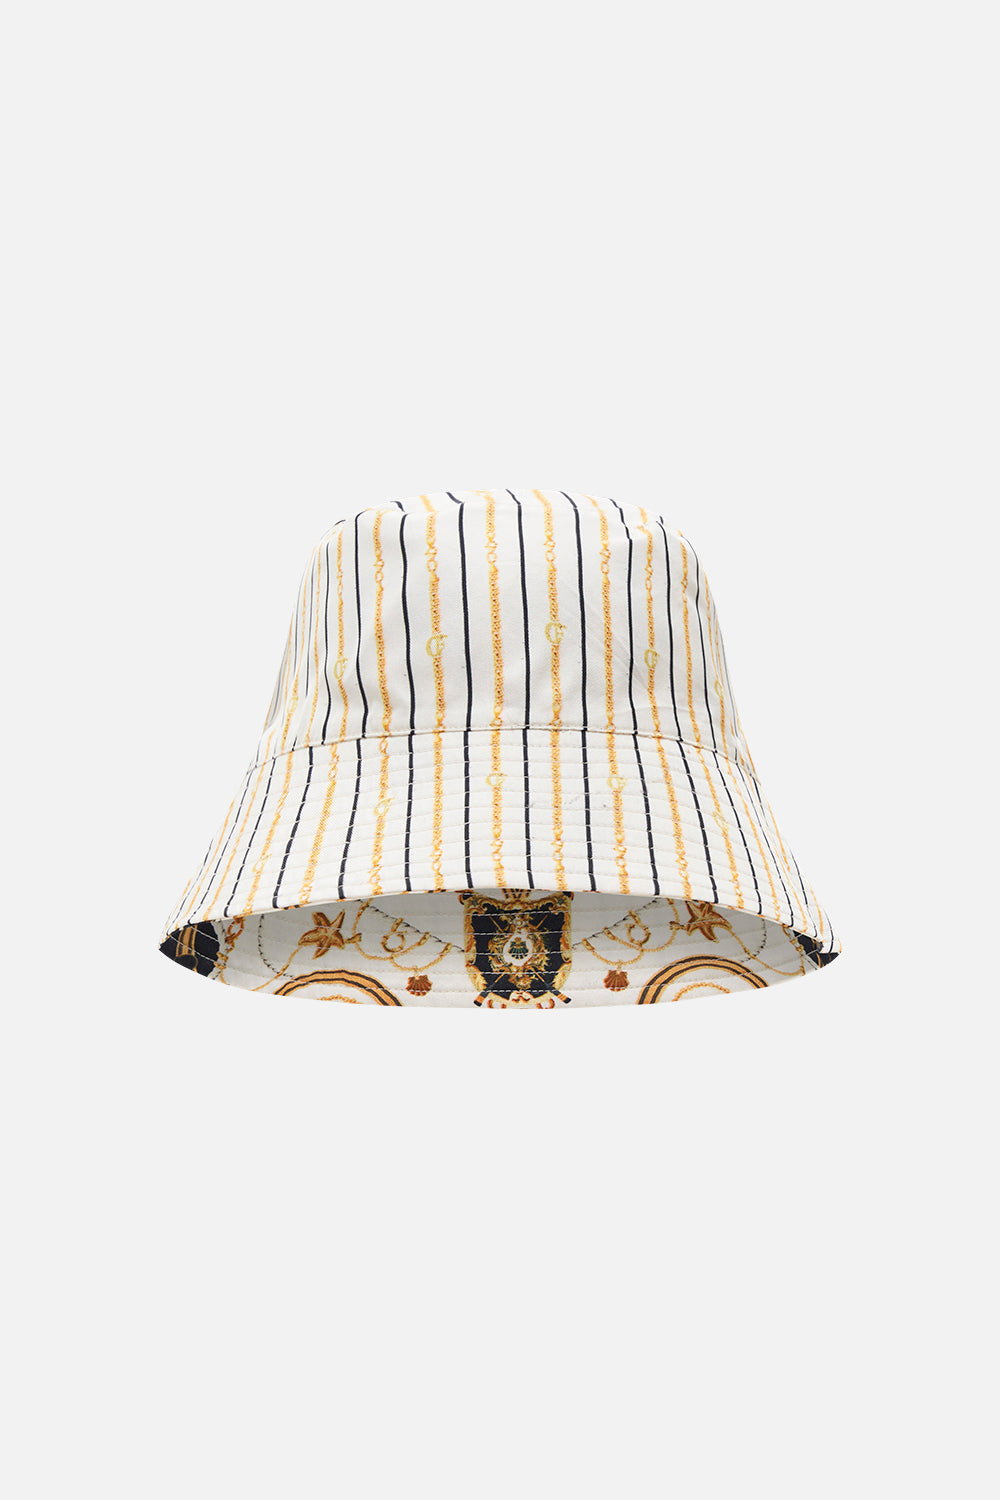 Product view of CAMILLA bucket hat in Sea Charm print